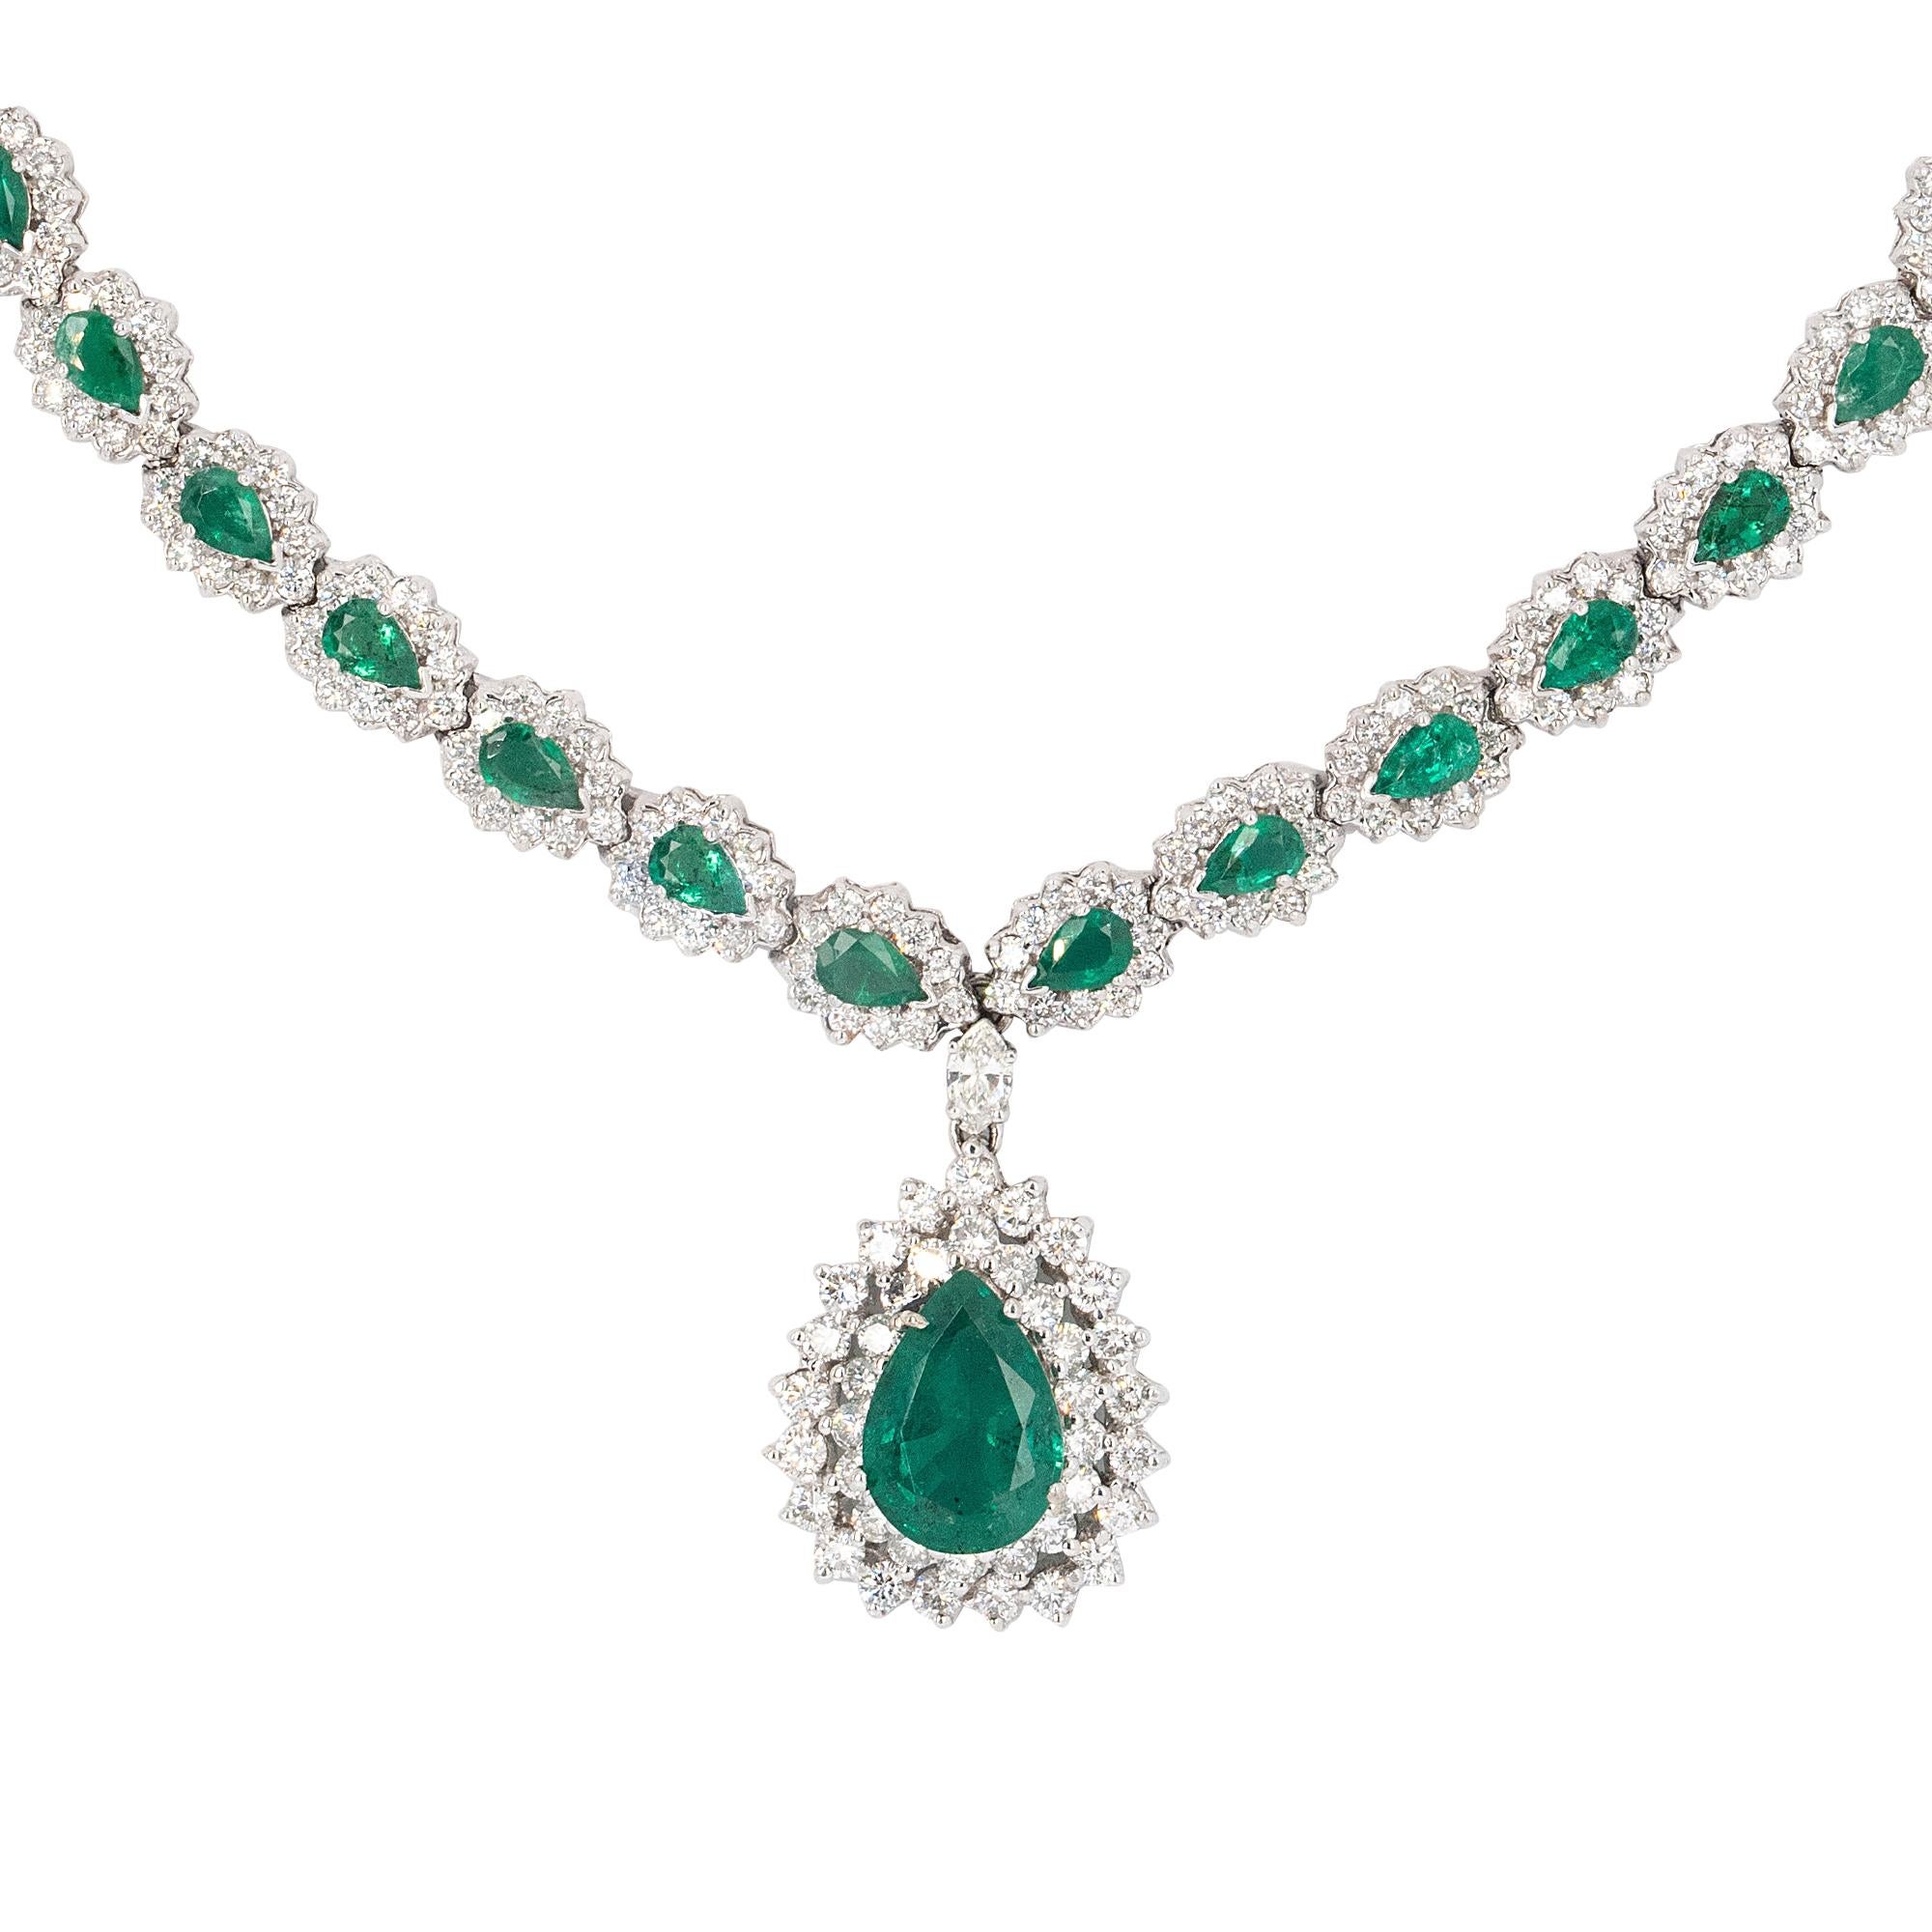 Material: 14k White Gold
Emerald Details: Approx 6ct total Emerald Weight, Approx 10.5ctw
Diamond Details: Natural Diamonds Approx 5ctw
Total Weight: 47.1g (30.3dwt)
Center Measurements: 25.9mm x 21.2mm x 10.9mm
Chain Measurements: 17